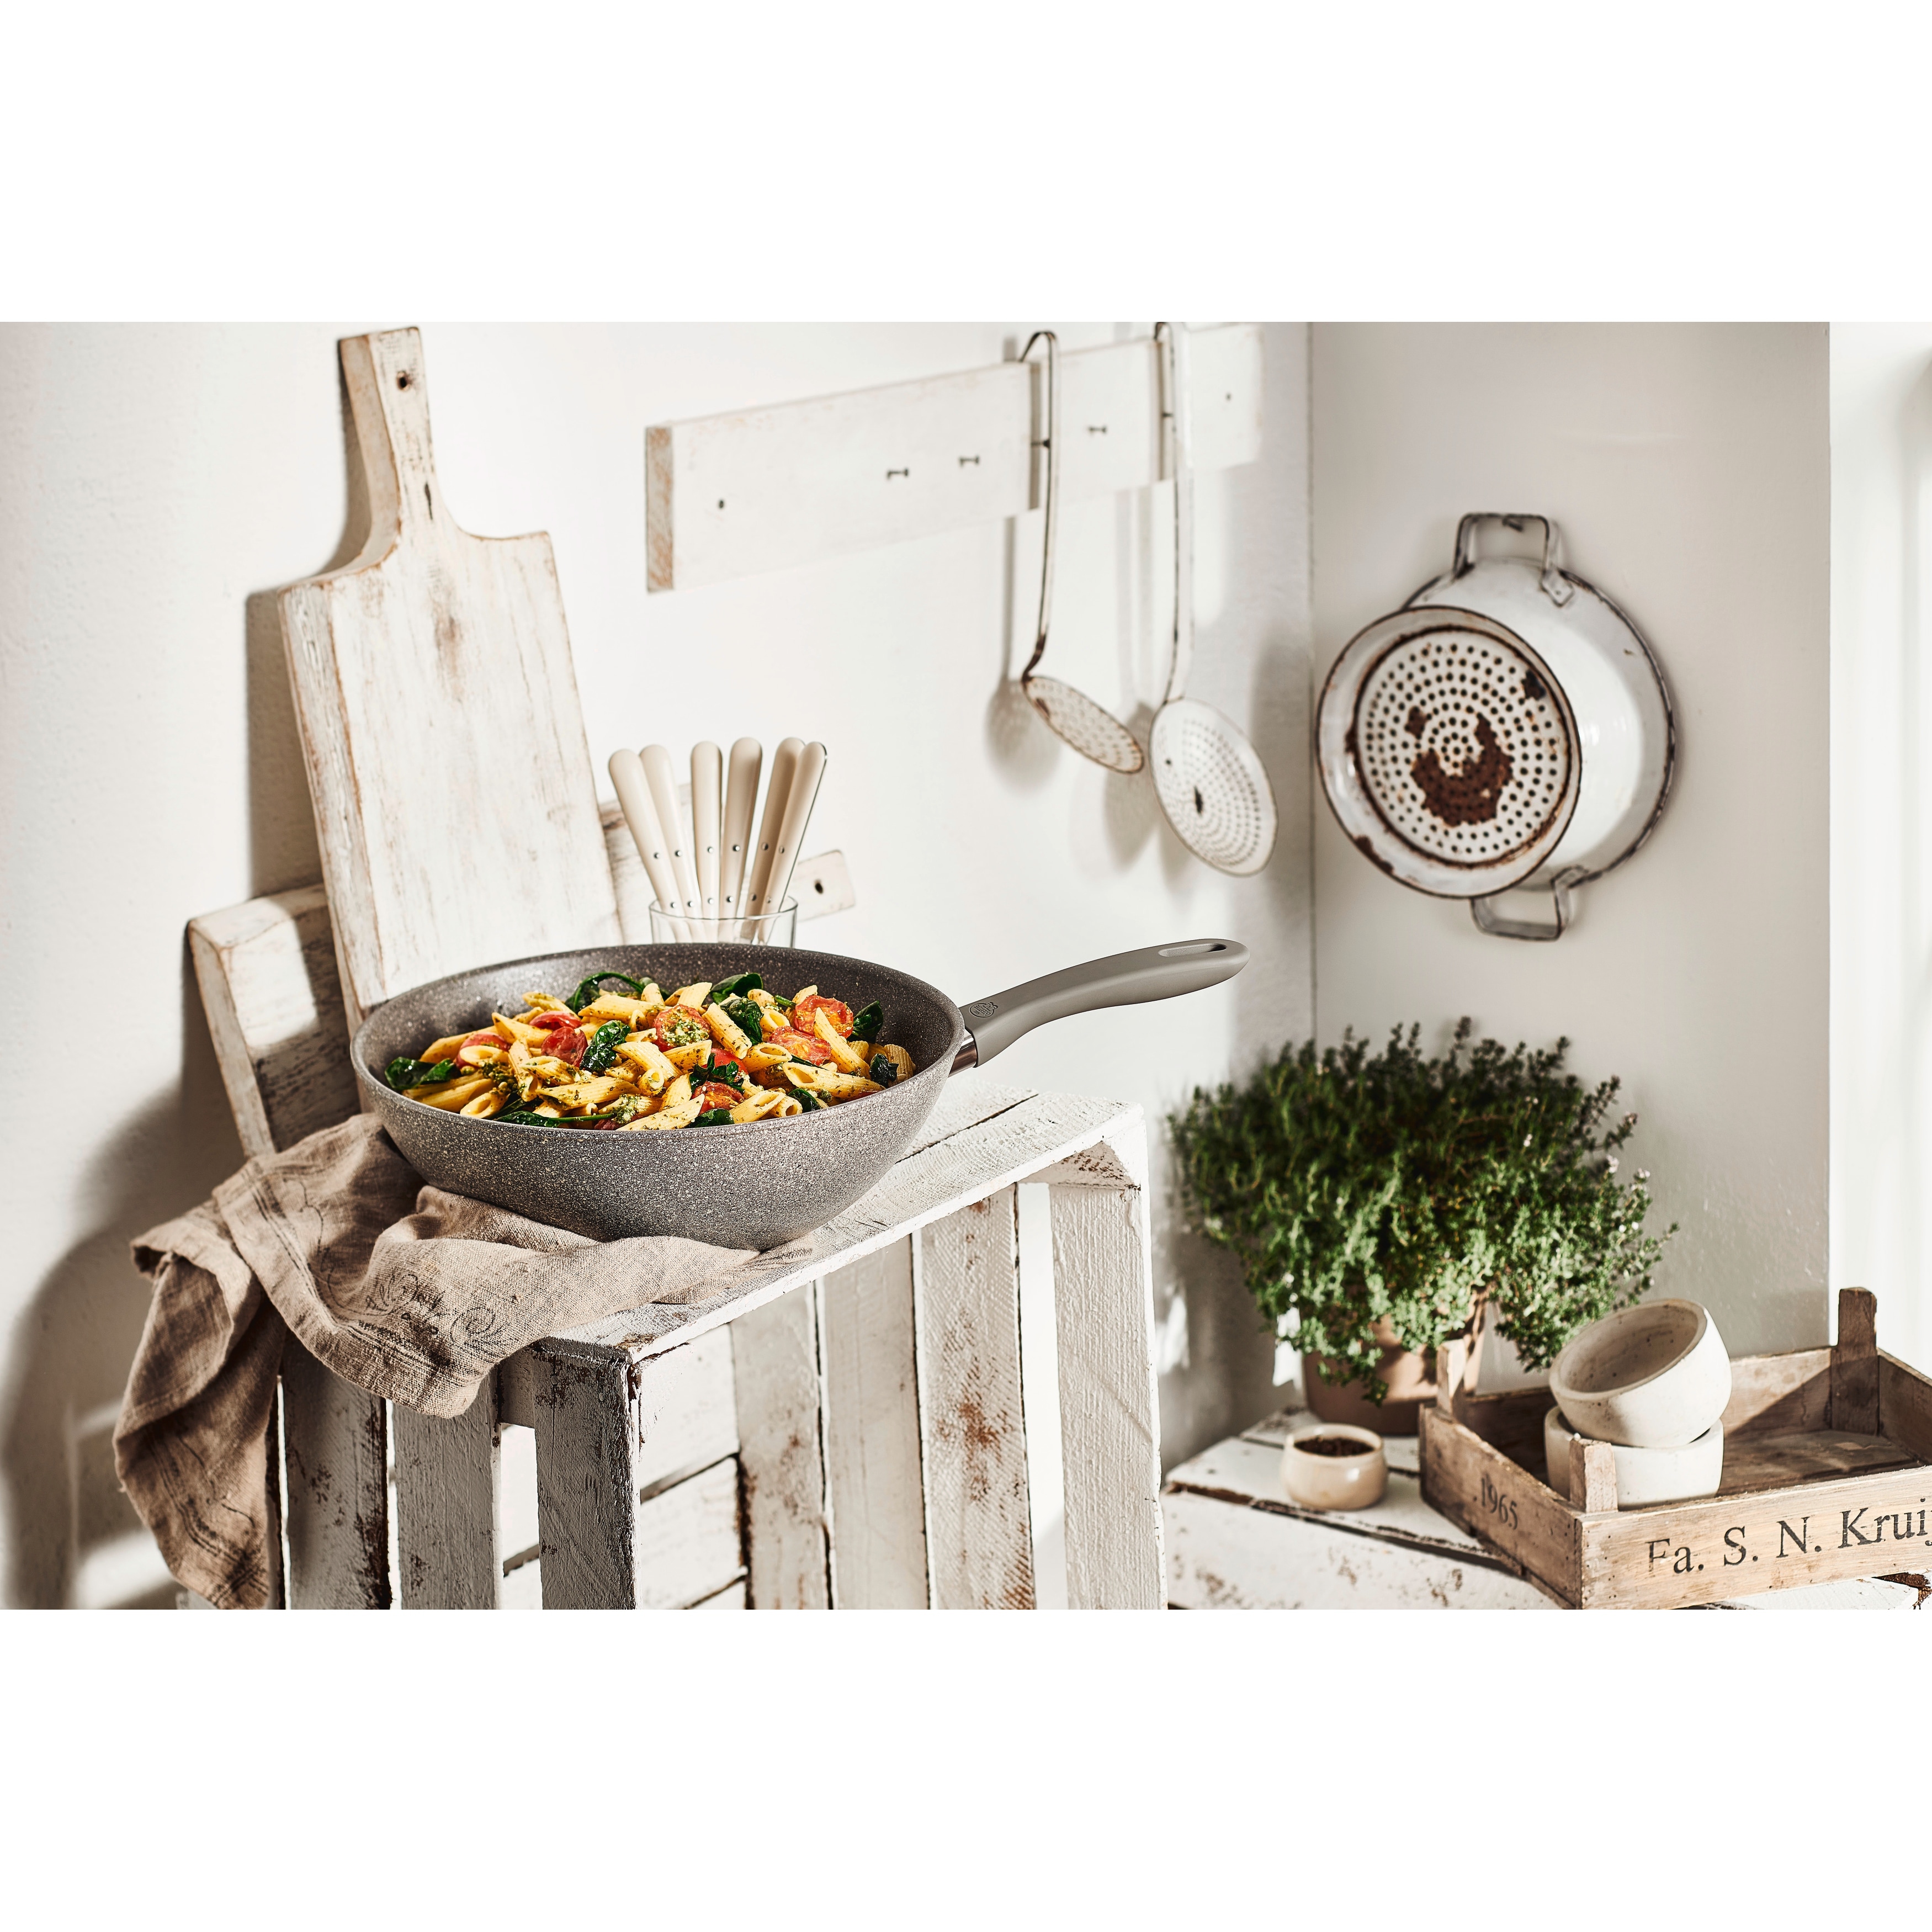 BALLARINI Parma by HENCKELS Forged Aluminum Nonstick Fry Pan, Made in Italy  - Granite - Bed Bath & Beyond - 18303304